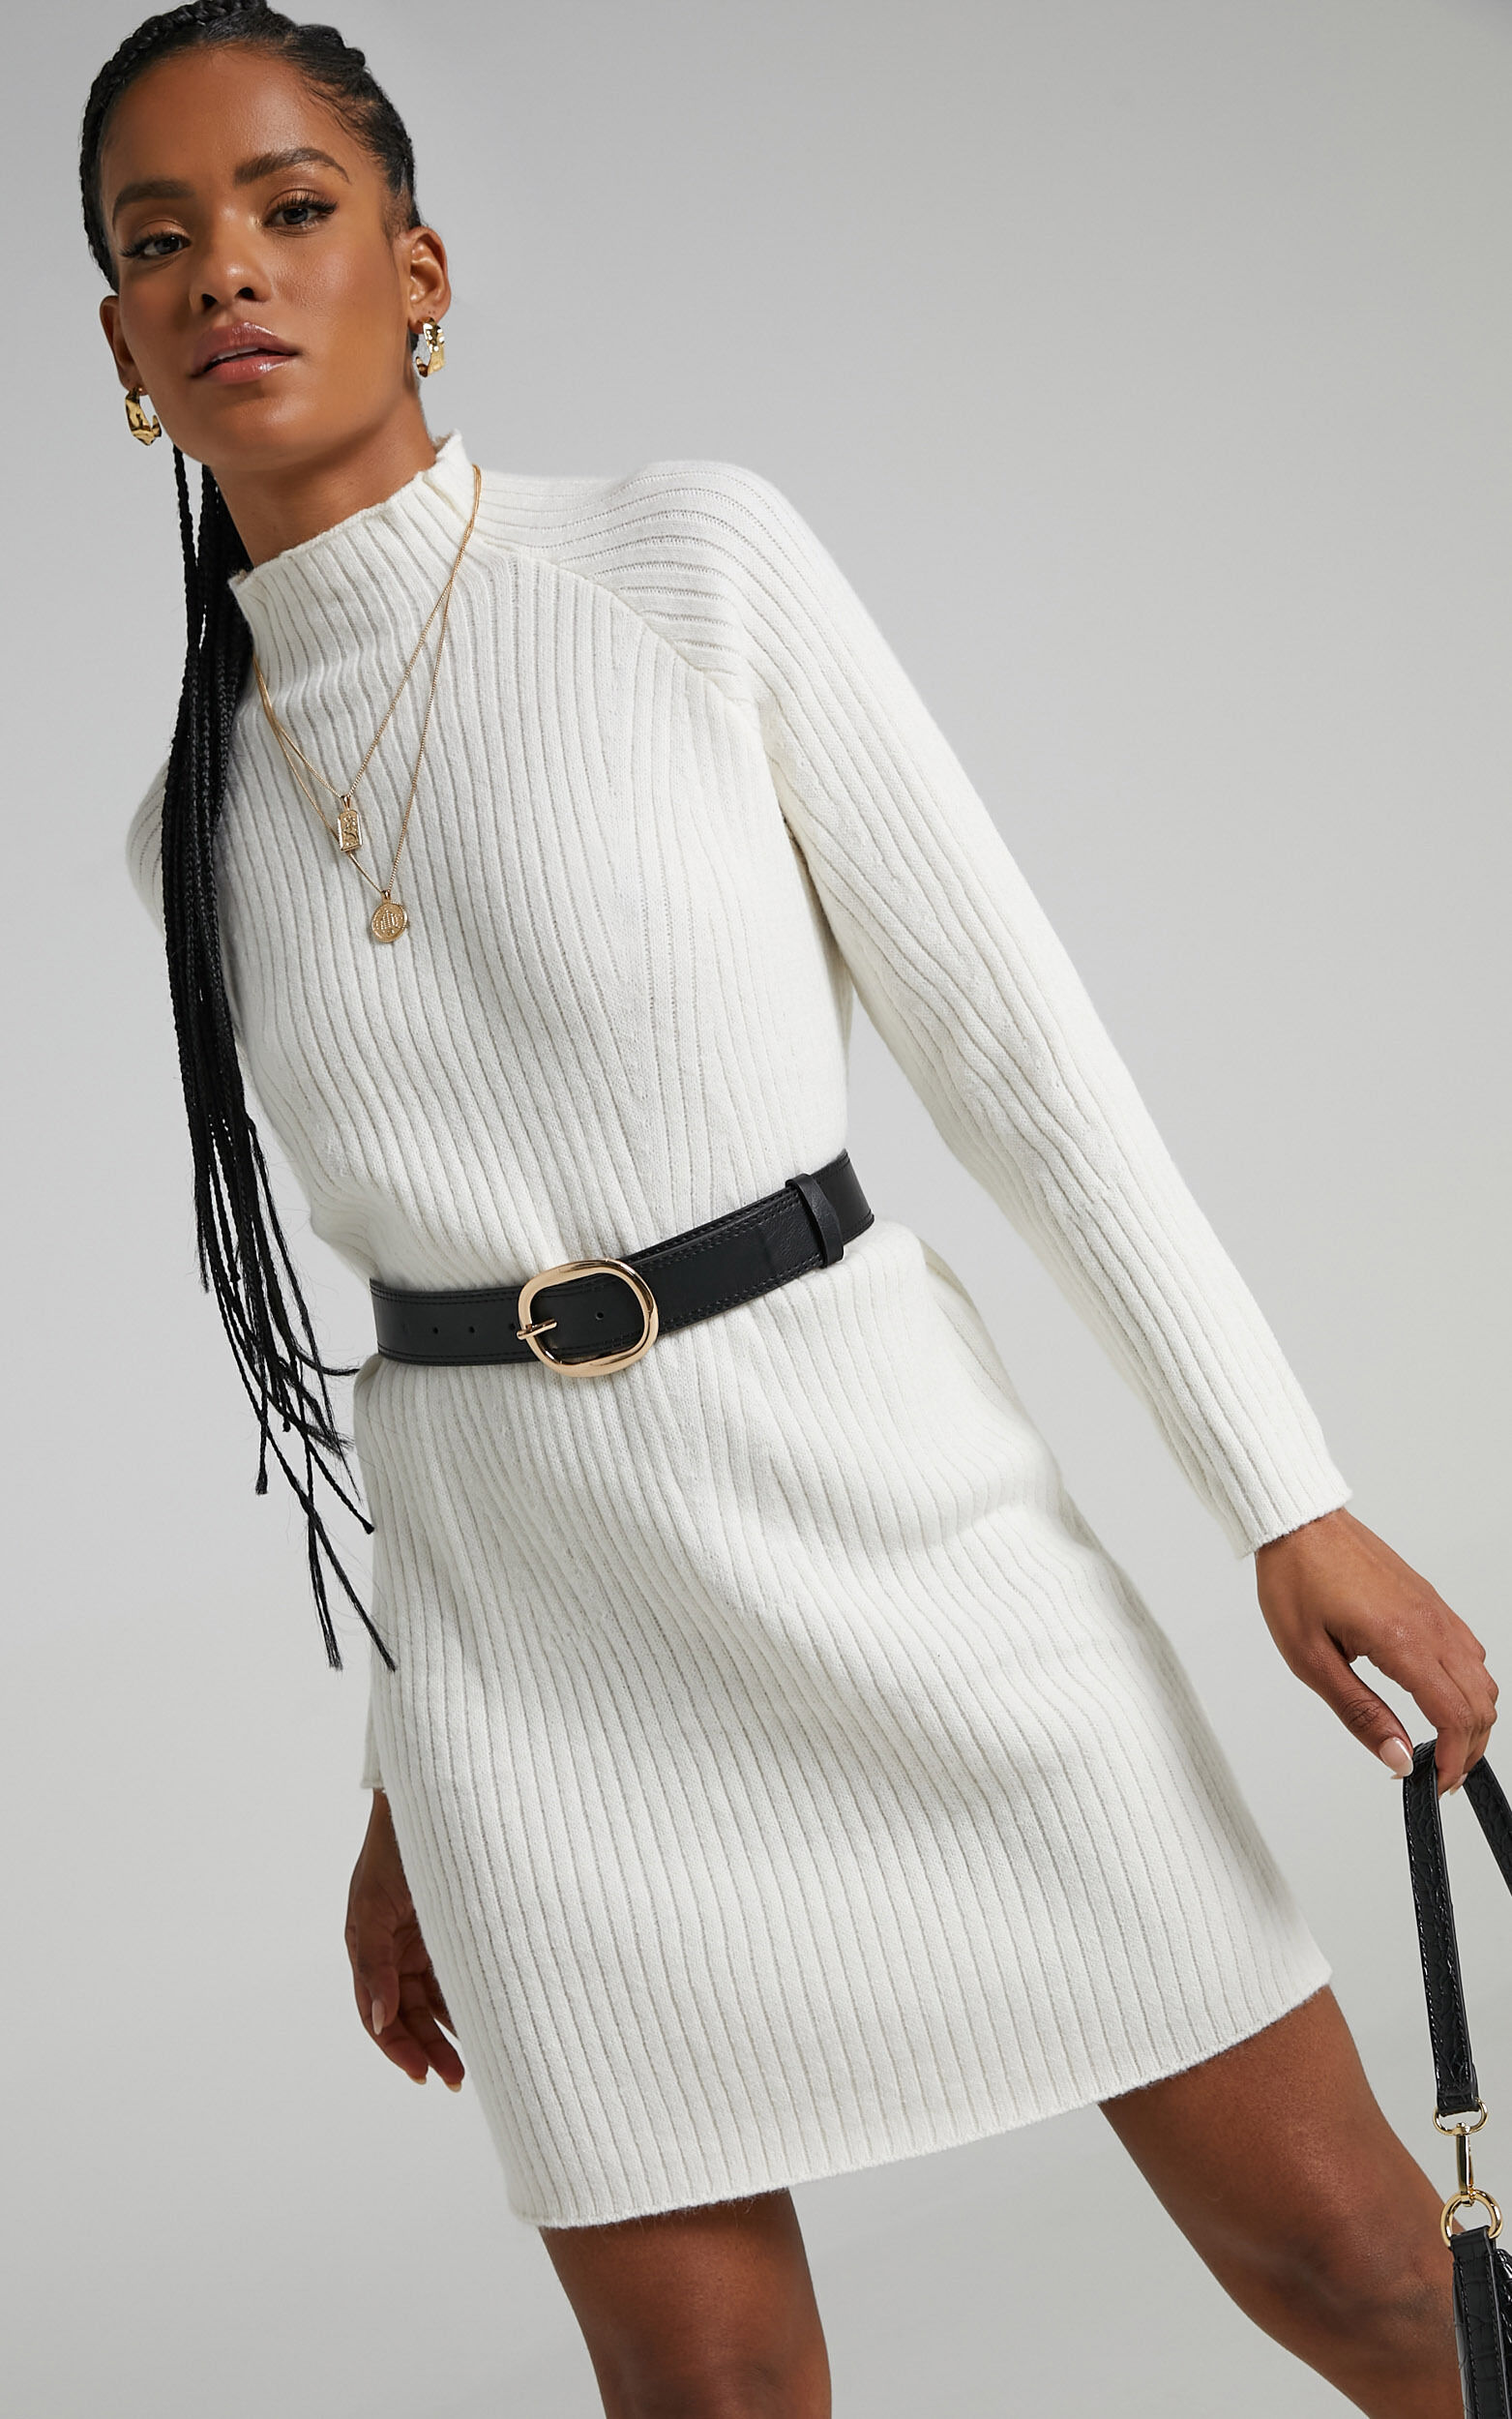 Shantelle Knit Dress in Cream - L/XL, CRE1, super-hi-res image number null